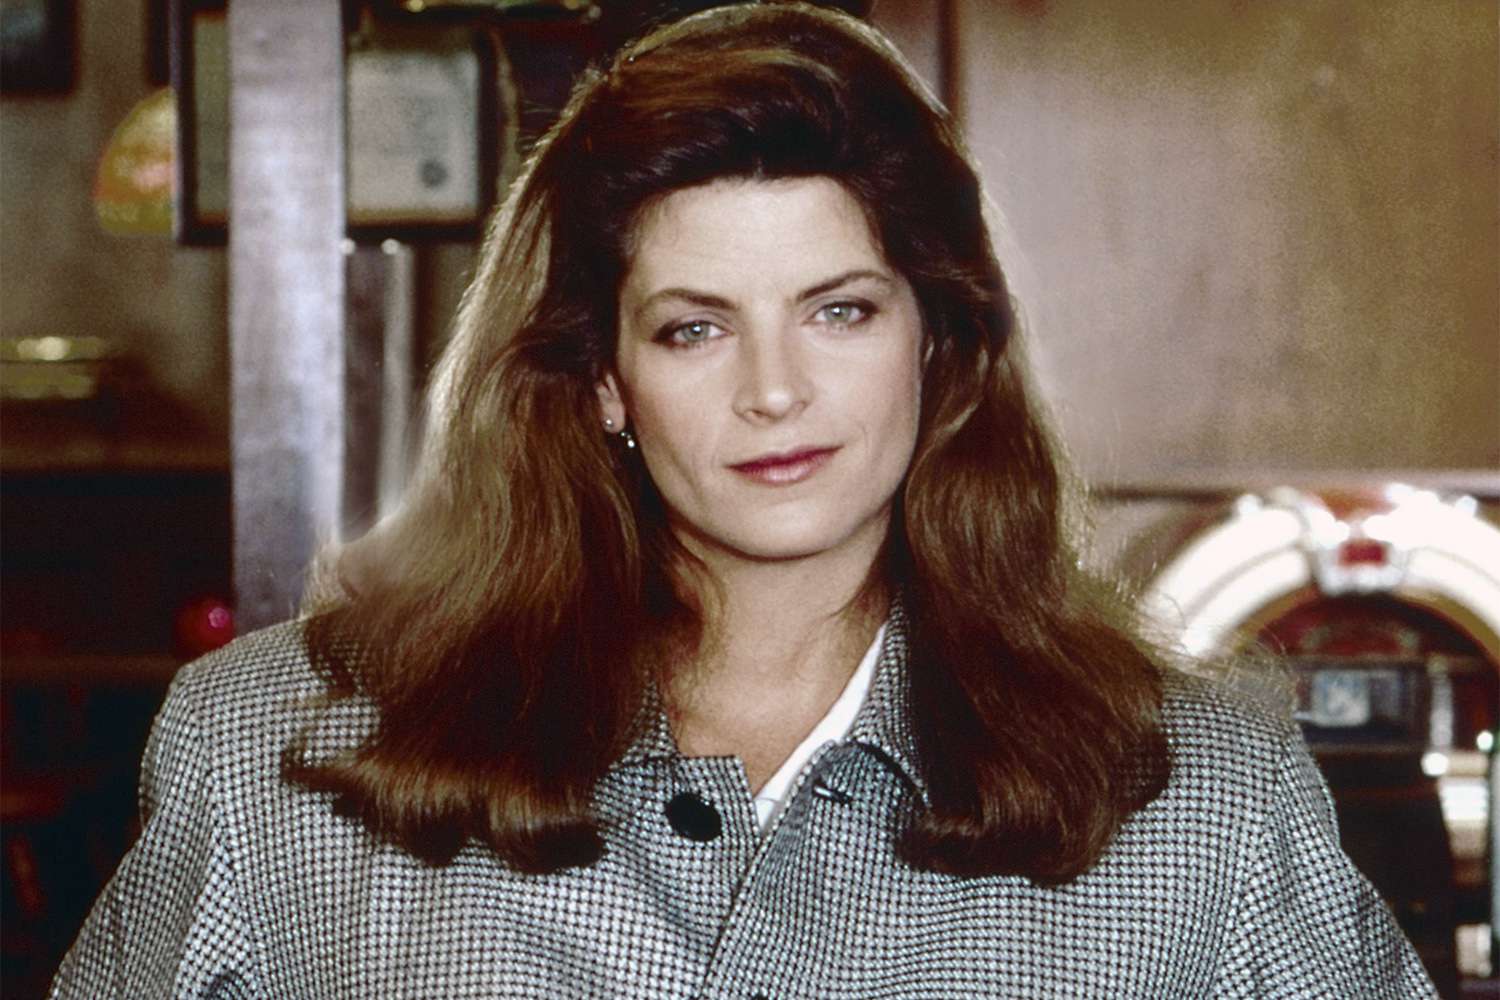 Who is Kirstie Alley